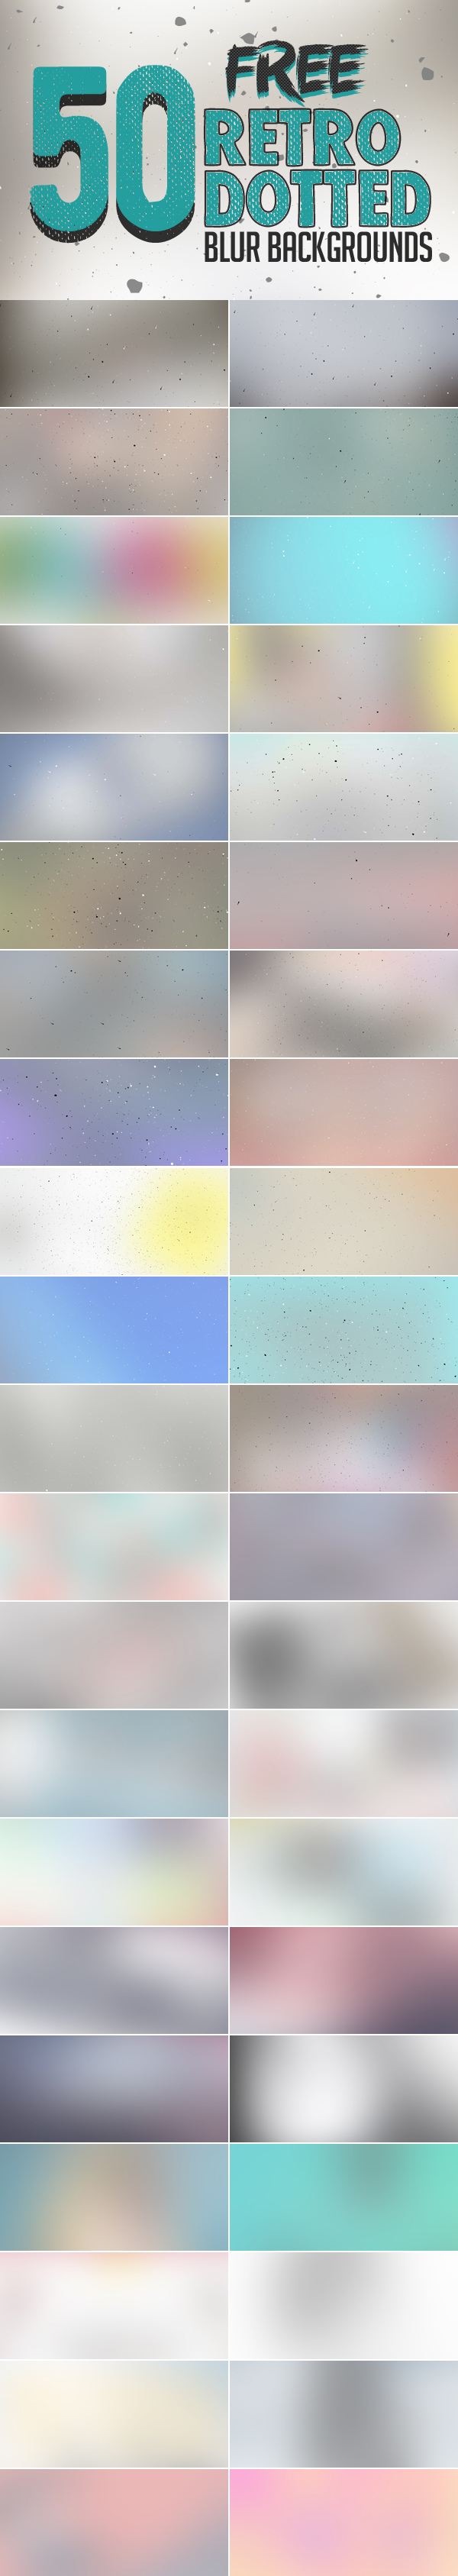 Free retro blur backgrounds with dotted pattern